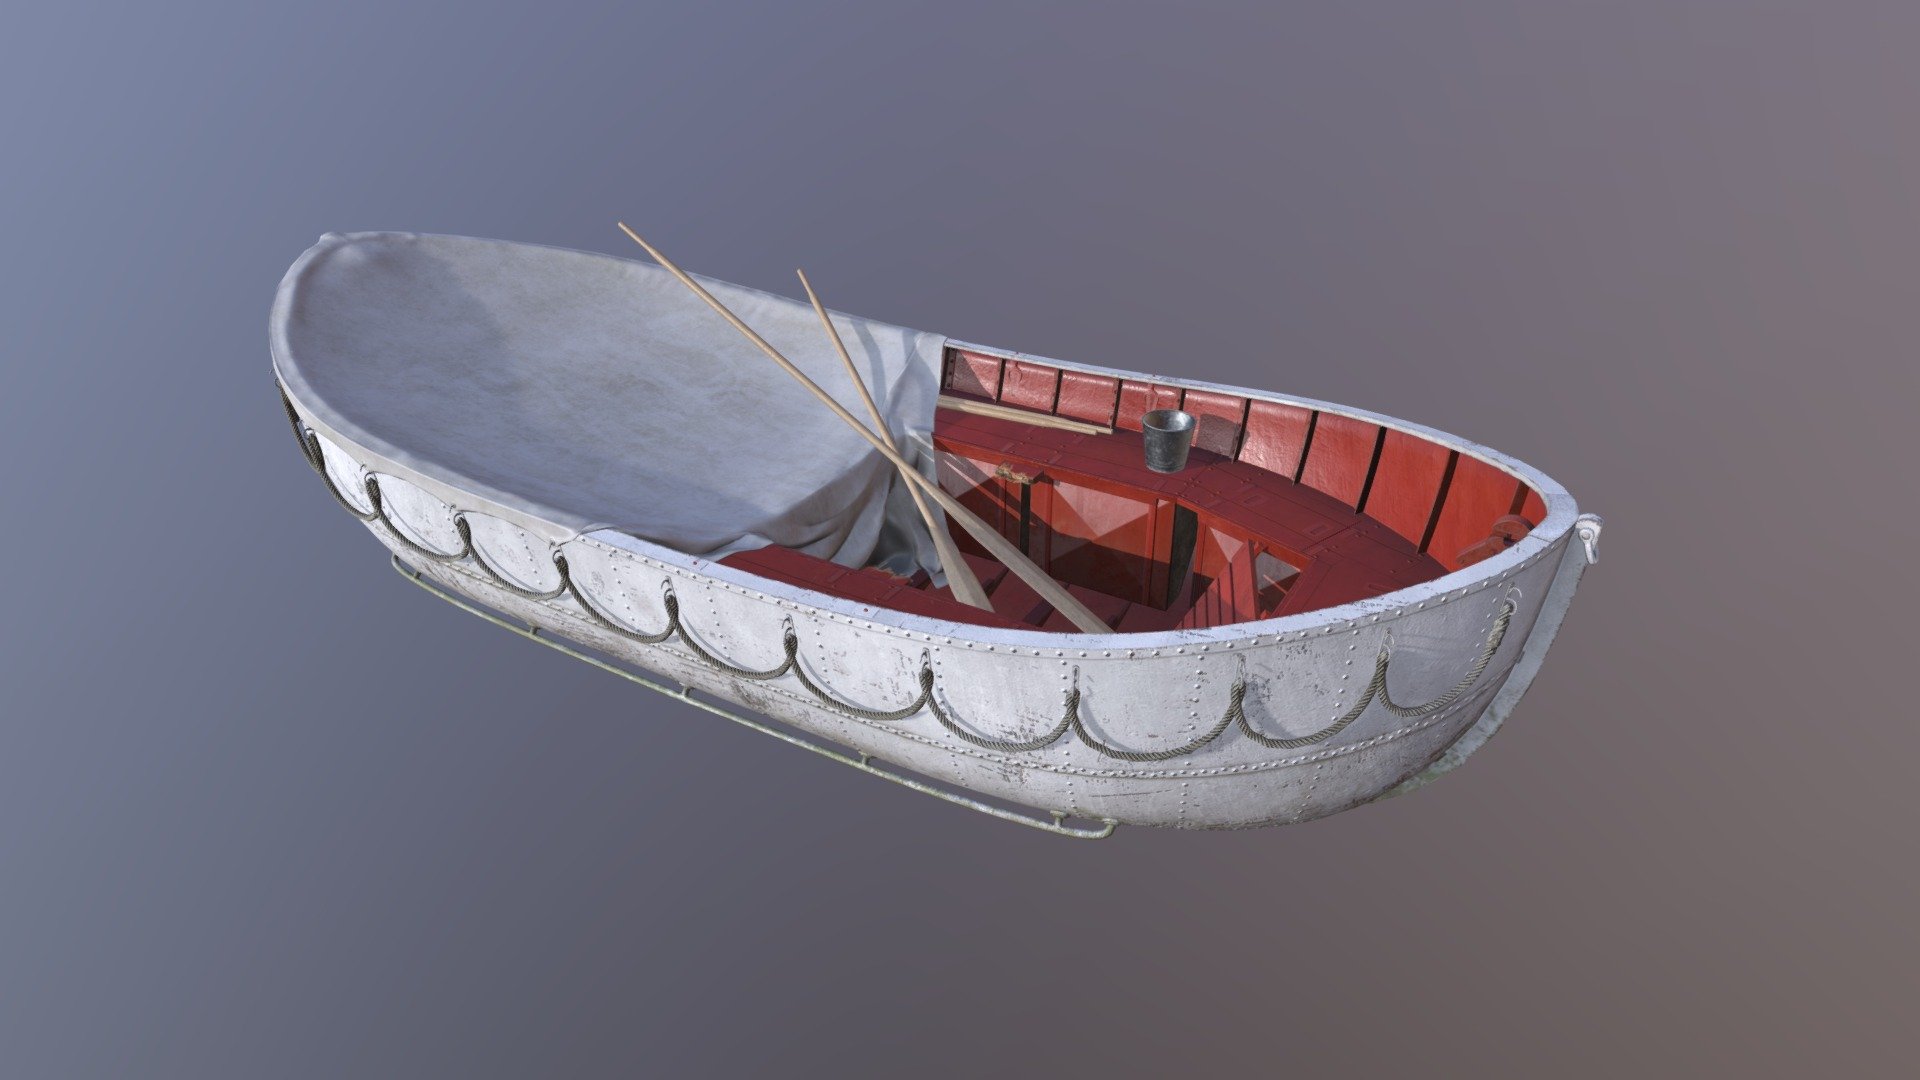 Life of Pi is one of my favourite films, so I wanted to recreate the iconic lifeboat as a game asset. Using it as a reference really helped me focus on improving my modelling and texturing skills. I'm planning to create the raft as well in the future, and import it all into an ocean environment 3d model